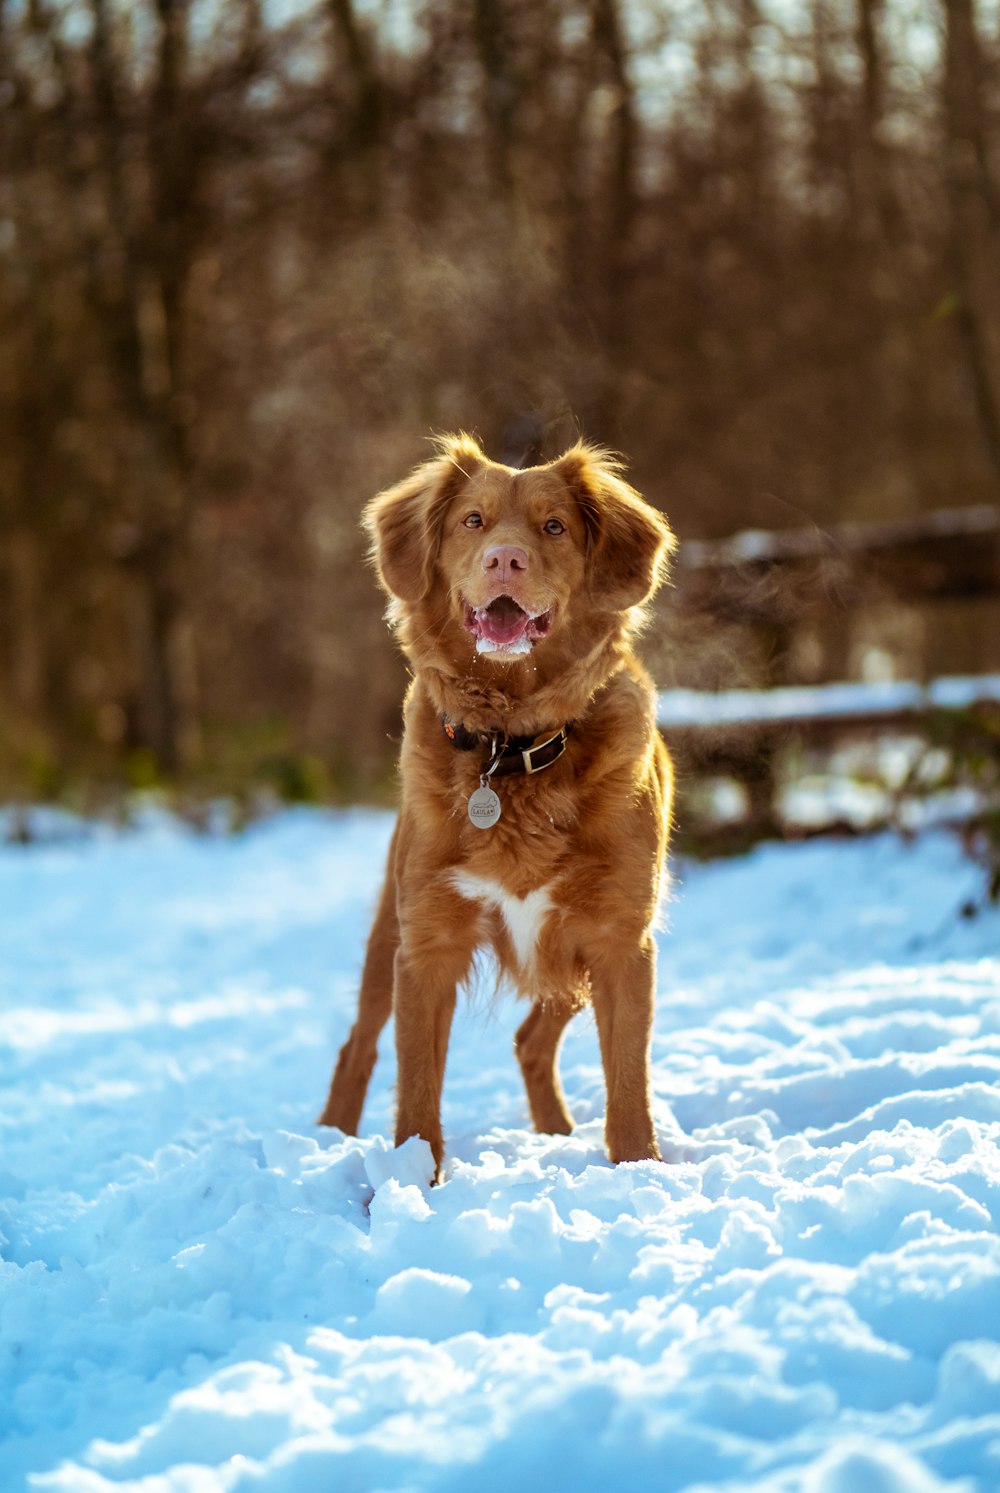 brown and white short coated dog stands on snow covered ground